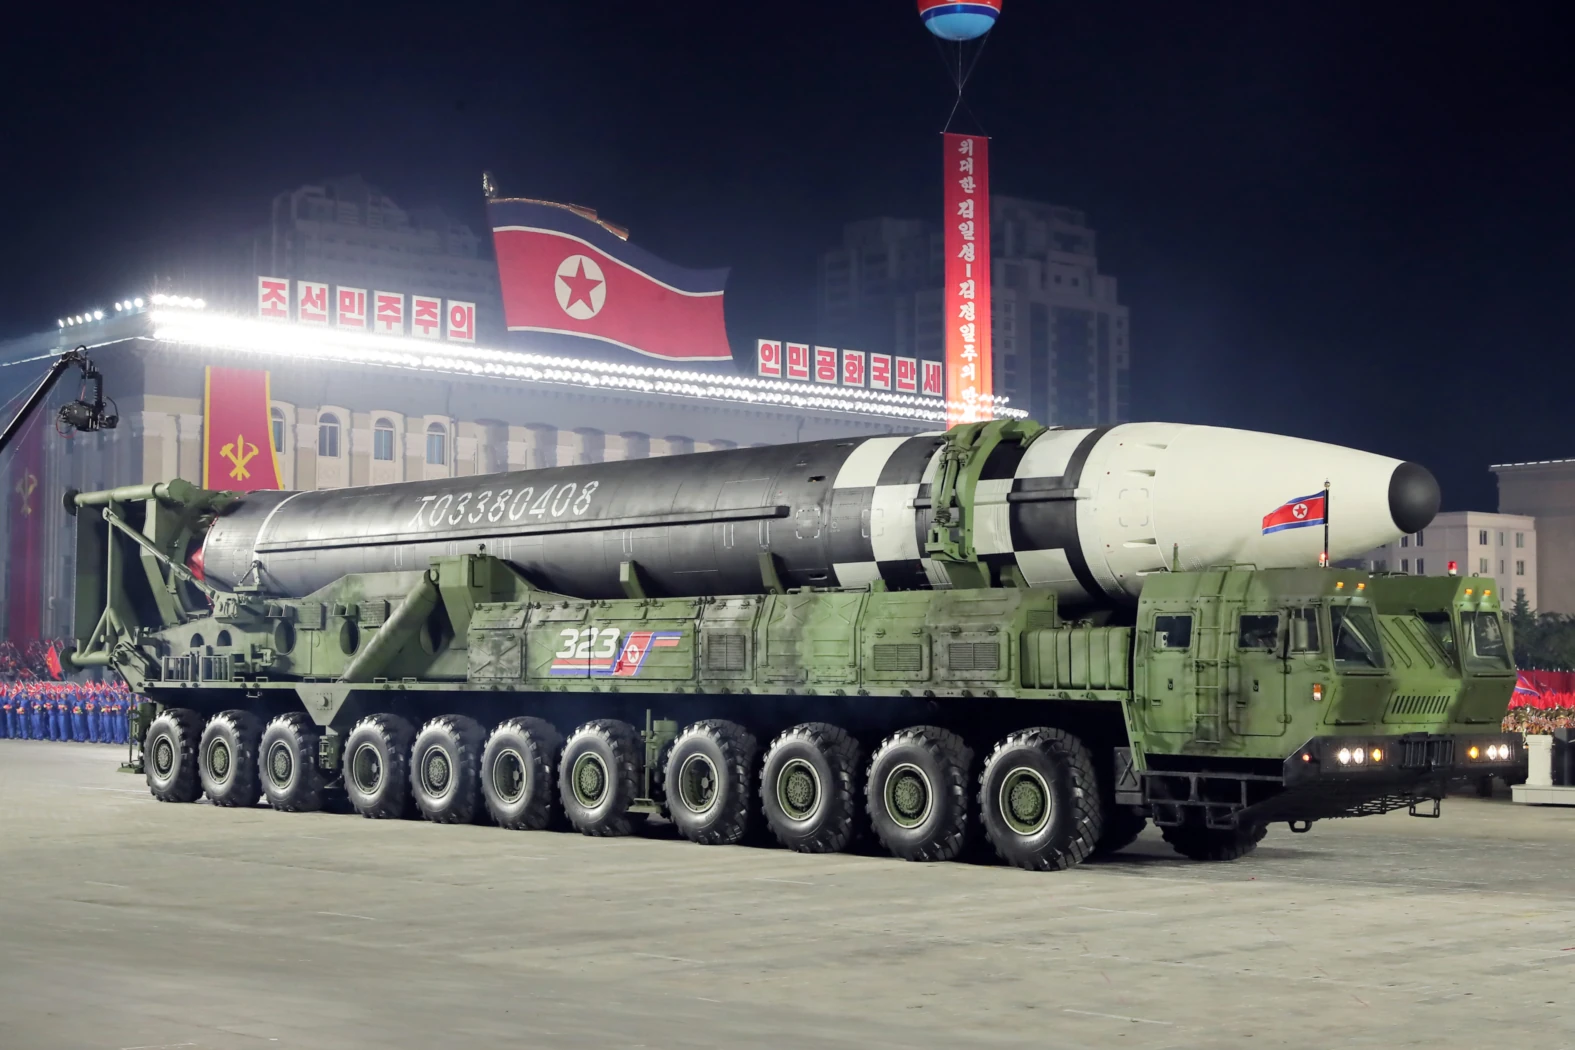 North Korea’s Monster ICBM Hwasong-17 tested, capable of hitting anywhere in the U.S.